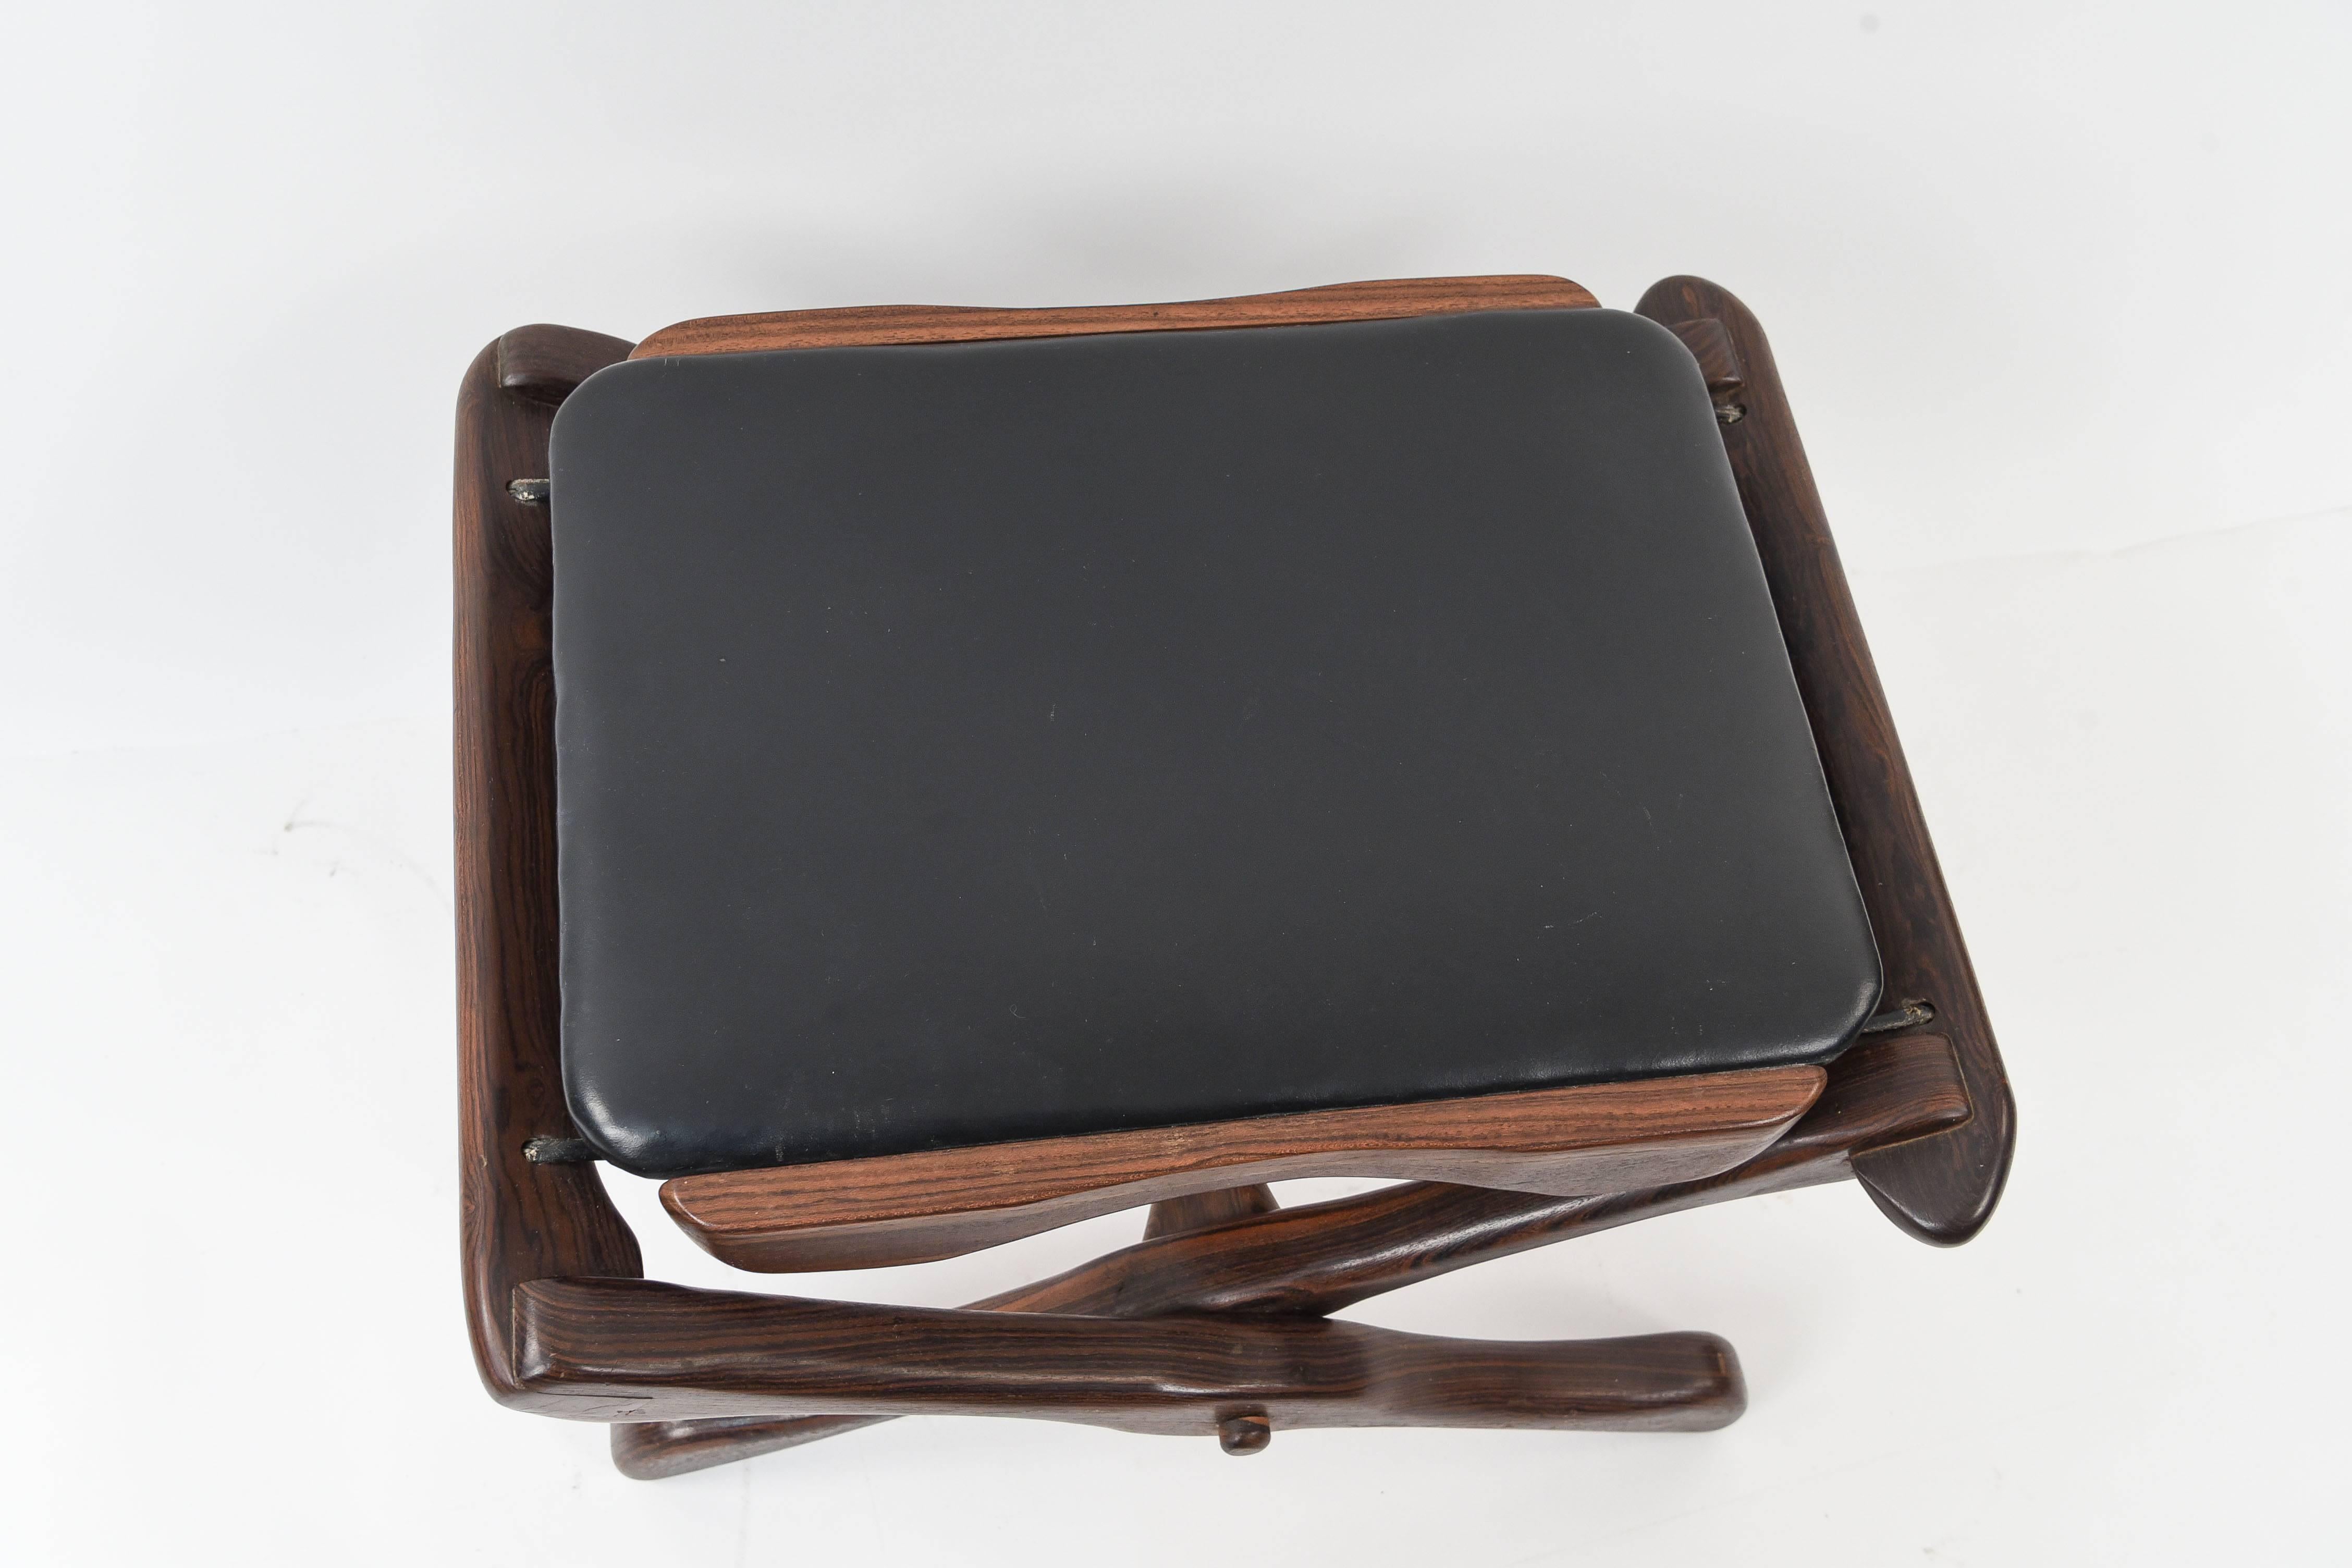 A very nice example of Don Shoemaker great craftsmanship this amazing stool in stunning rosewood and leather is not only a piece of function but one of art!